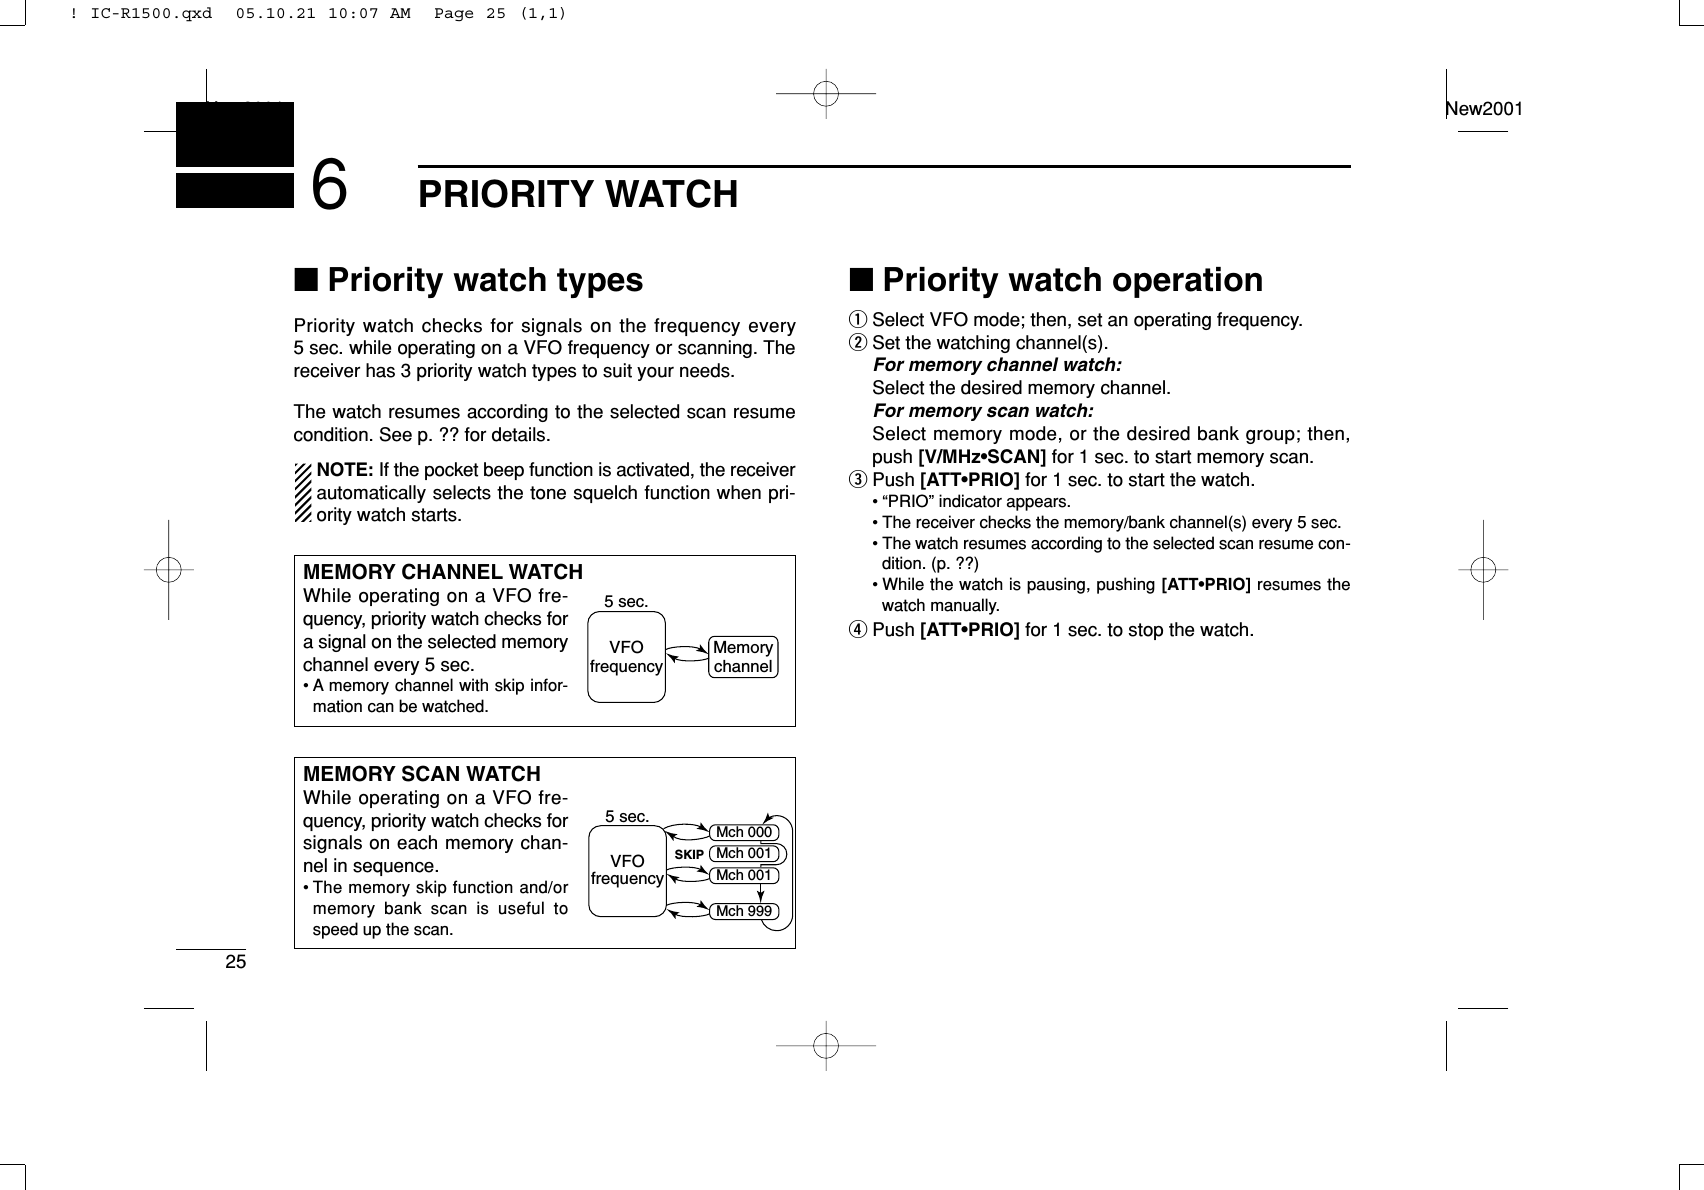 25PRIORITY WATCHNew2001New20016■Priority watch typesPriority watch checks for signals on the frequency every5 sec. while operating on a VFO frequency or scanning. Thereceiver has 3 priority watch types to suit your needs.The watch resumes according to the selected scan resumecondition. See p. ?? for details.NOTE: If the pocket beep function is activated, the receiverautomatically selects the tone squelch function when pri-ority watch starts.■Priority watch operationqSelect VFO mode; then, set an operating frequency.wSet the watching channel(s).For memory channel watch:Select the desired memory channel.For memory scan watch:Select memory mode, or the desired bank group; then,push [V/MHz•SCAN] for 1 sec. to start memory scan.ePush [ATT•PRIO] for 1 sec. to start the watch.• “PRIO” indicator appears.• The receiver checks the memory/bank channel(s) every 5 sec.• The watch resumes according to the selected scan resume con-dition. (p. ??)• While the watch is pausing, pushing [ATT•PRIO] resumes thewatch manually.rPush [ATT•PRIO] for 1 sec. to stop the watch.MEMORY CHANNEL WATCHWhile operating on a VFO fre-quency, priority watch checks fora signal on the selected memorychannel every 5 sec.• A memory channel with skip infor-mation can be watched.5 sec.VFOfrequencyMemorychannelMEMORY SCAN WATCHWhile operating on a VFO fre-quency, priority watch checks forsignals on each memory chan-nel in sequence.• The memory skip function and/ormemory bank scan is useful tospeed up the scan.5 sec.VFOfrequencySKIPMch 000Mch 001Mch 001Mch 999! IC-R1500.qxd  05.10.21 10:07 AM  Page 25 (1,1)